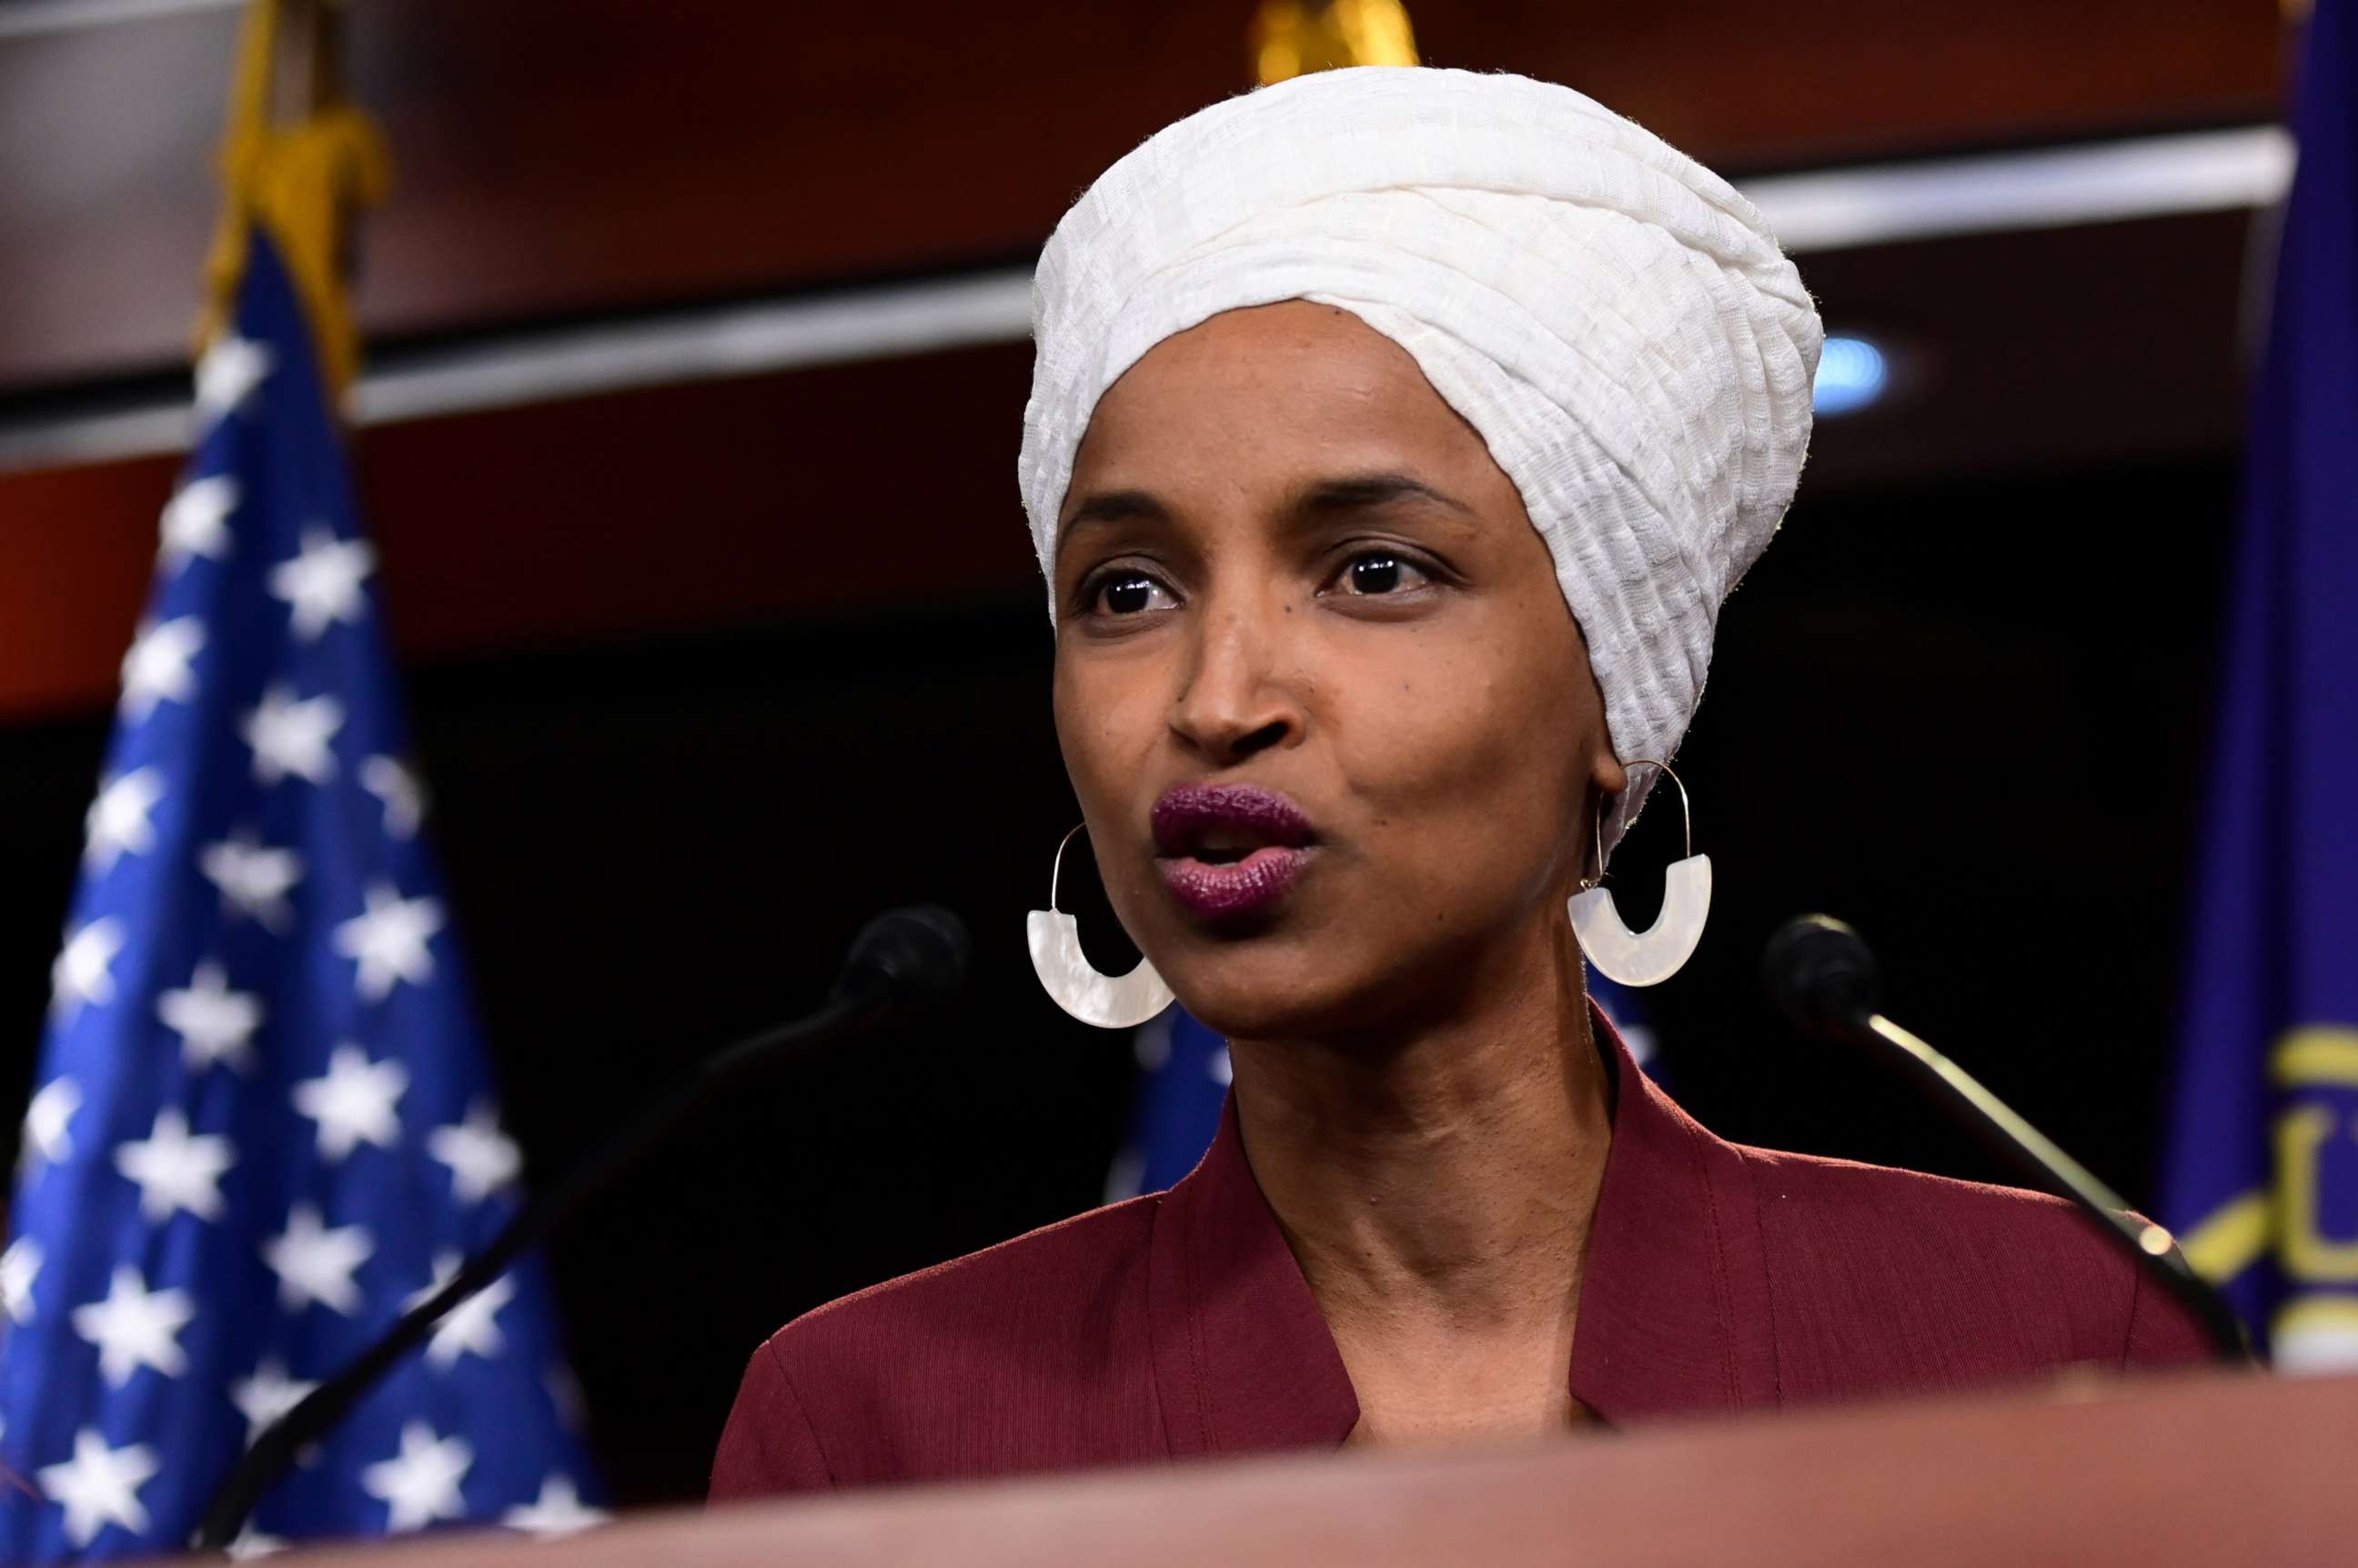 PHOTO: Rep Ilhan Omar speaks at a news conference after Democrats in the U.S. Congress moved to formally condemn President Donald Trump's attacks on the four minority congresswomen on Capitol Hill in Washington, July 15, 2019.